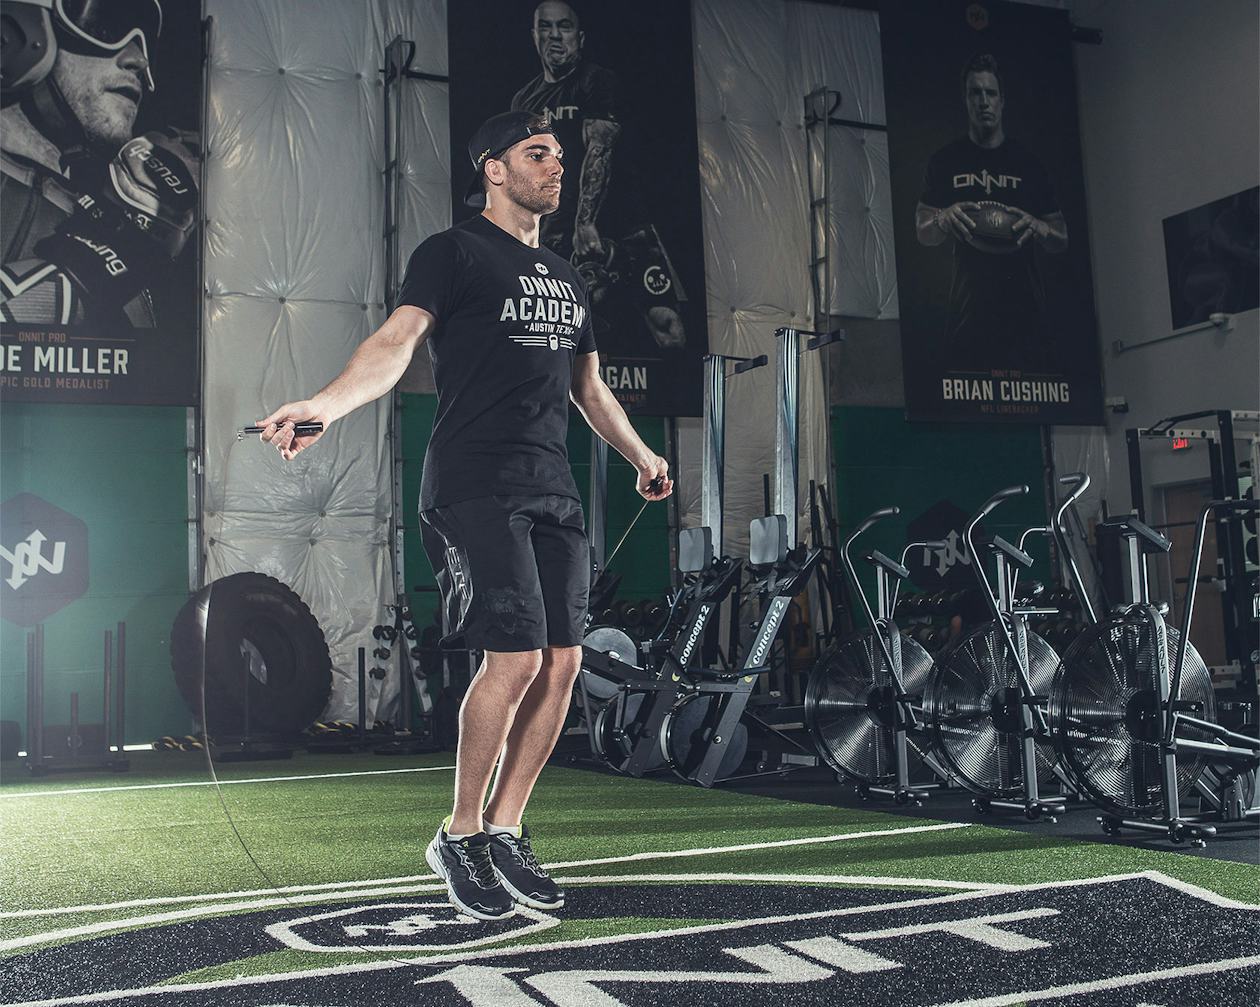 Jump Rope Workout: Add These 3 Routines to Your Schedule